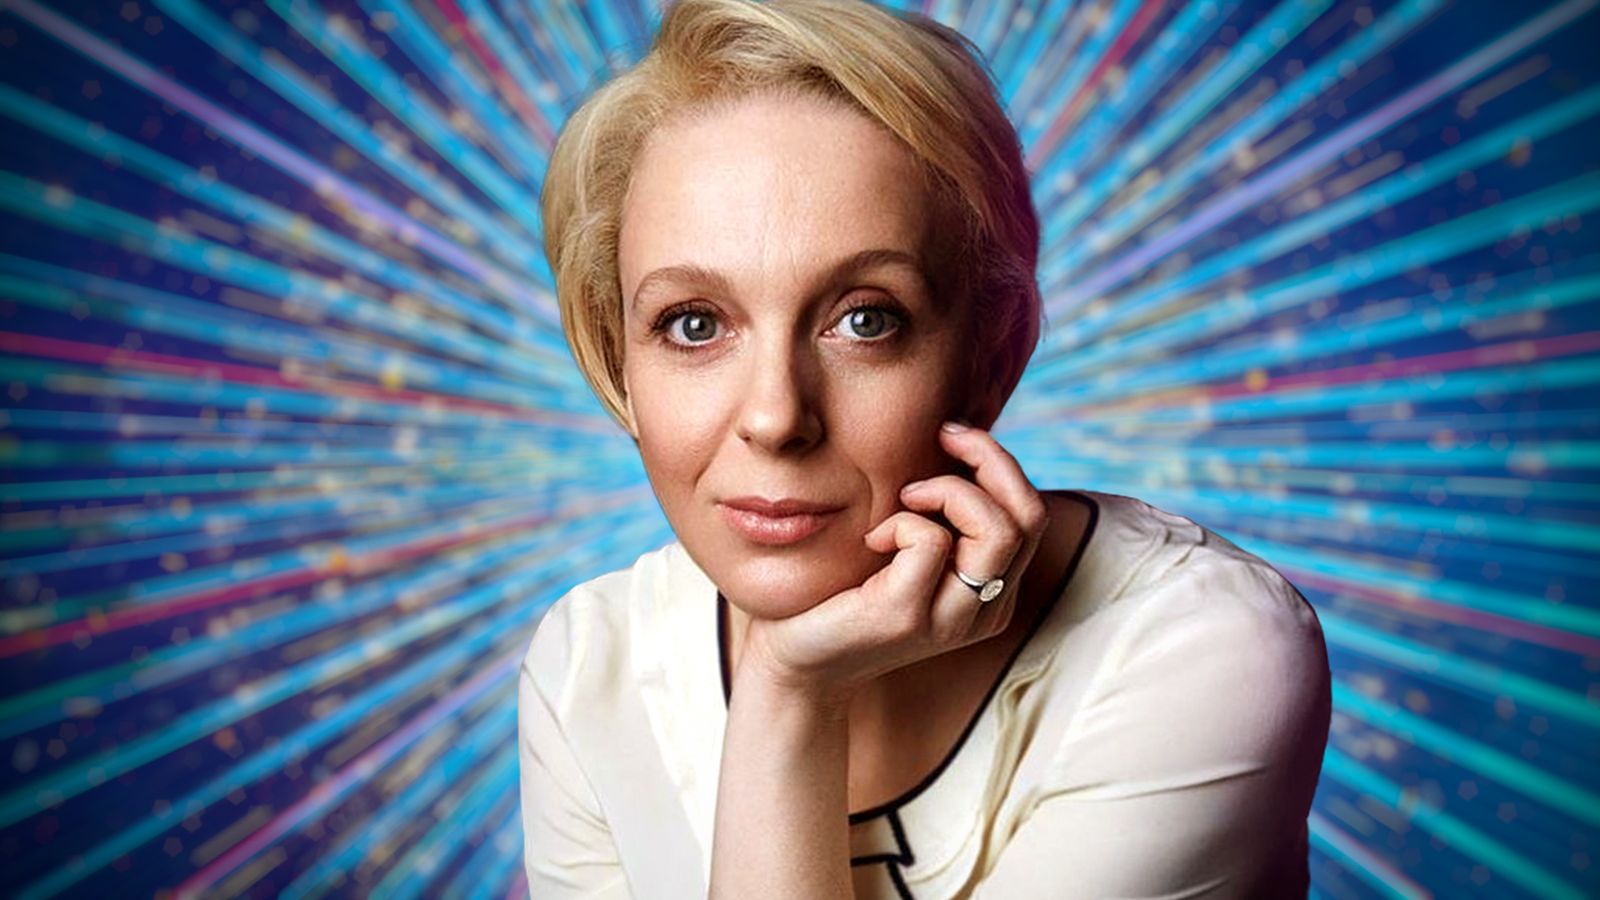 Strictly Come Dancing star Amanda Abbington addresses backlash over tweets after accusations of transphobia